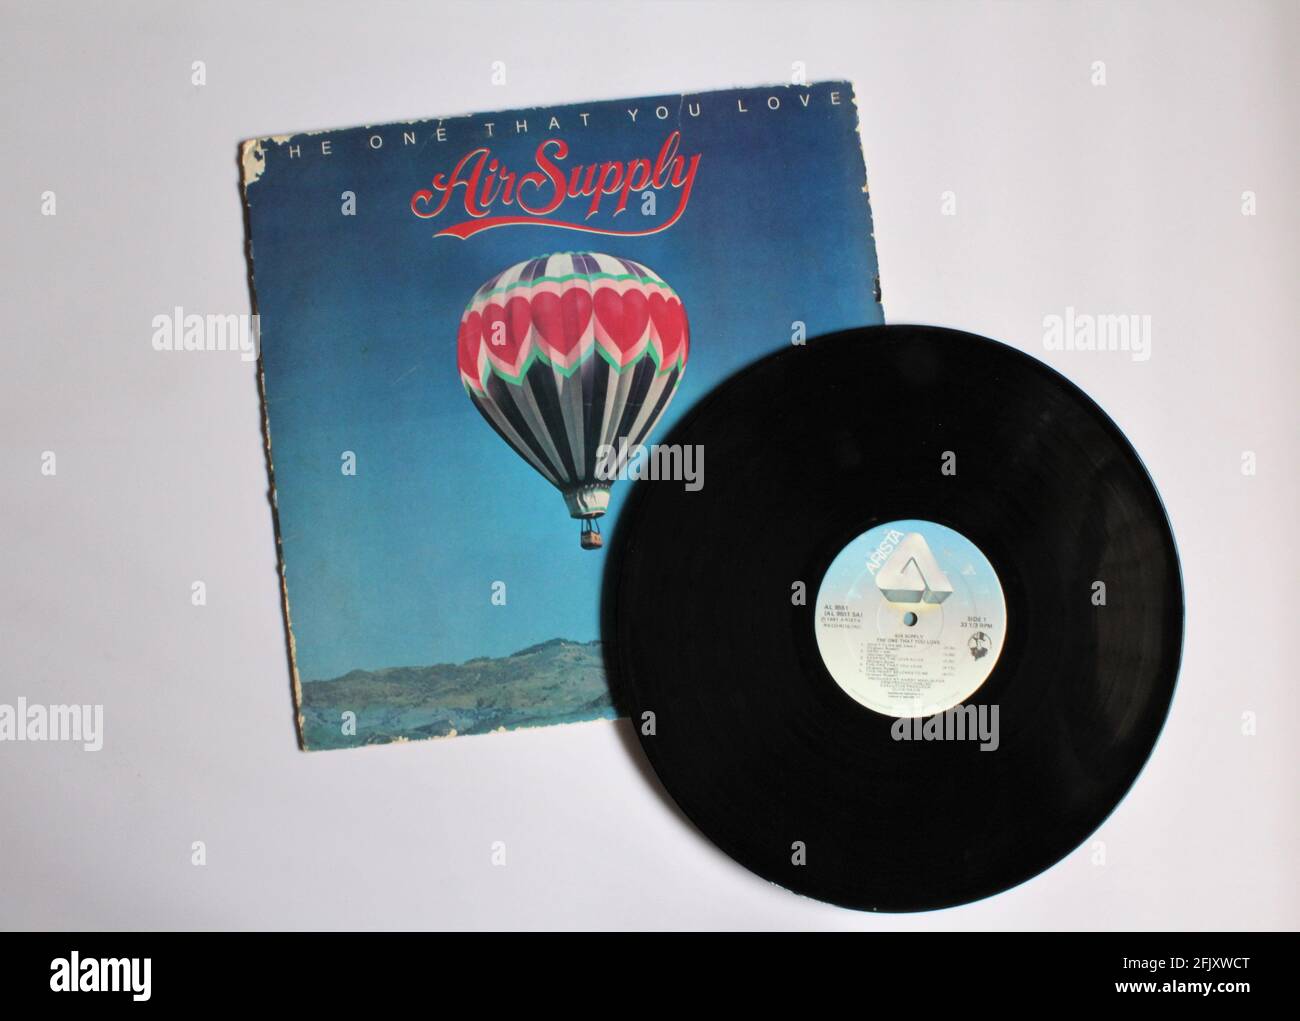 Australian Pop band, Air Supply music album on vinyl record LP disc. Titled: The One That You Love Stock Photo